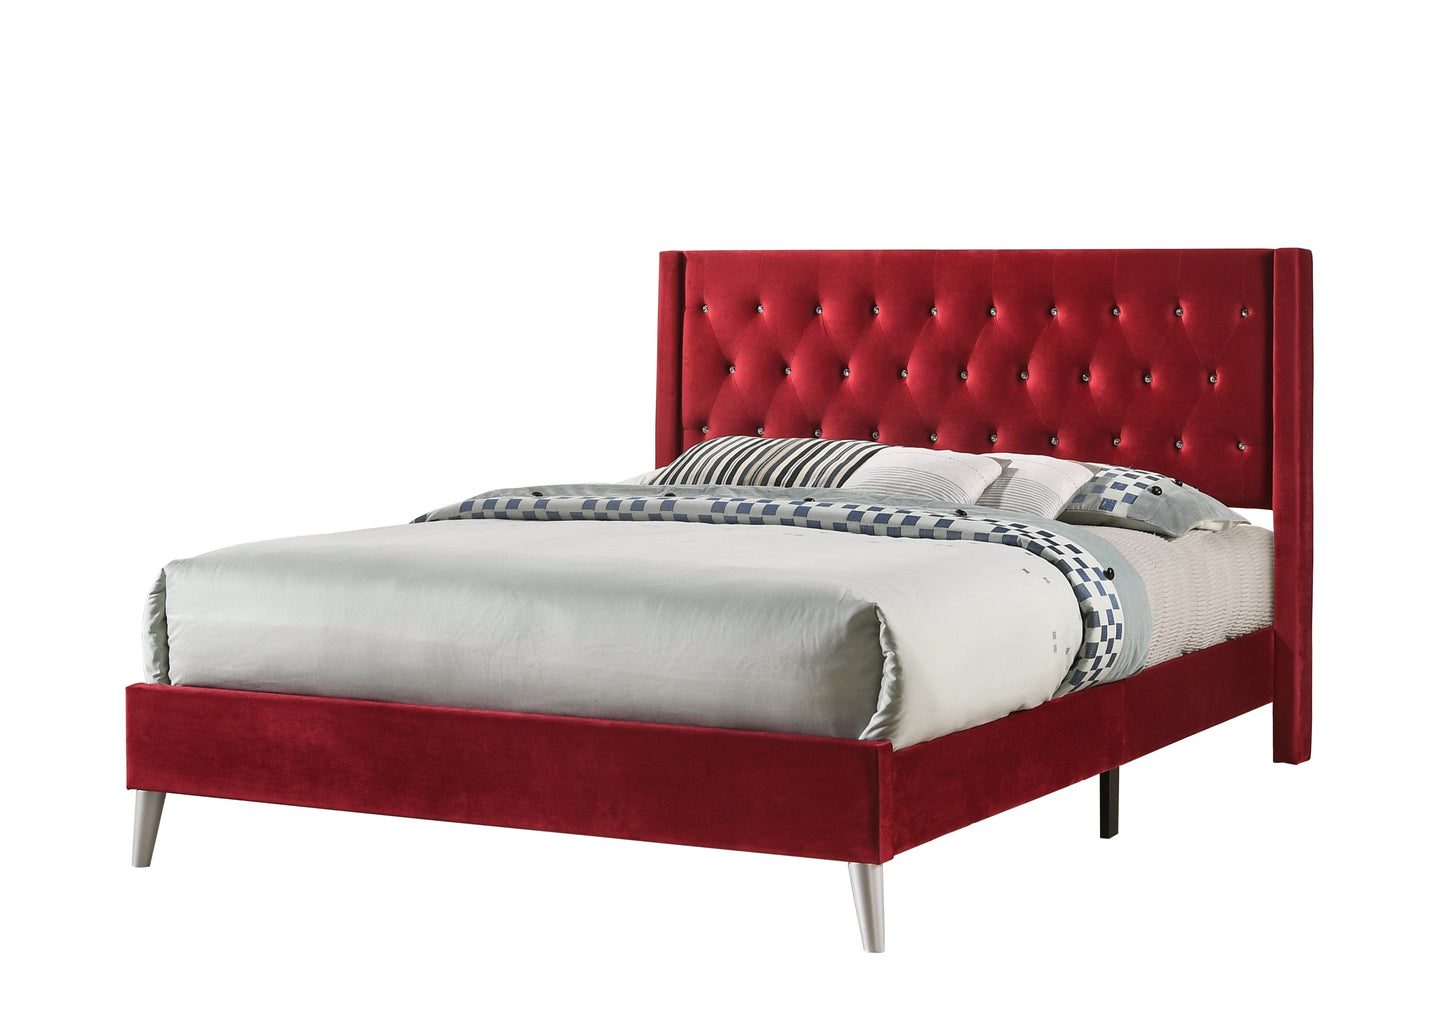 Glory Furniture Queen Bed CHERRY / 48"H X 67"W X 87"D Glory Furniture Bergen G1628-QB-UP Queen Bed G1628-QB-UP